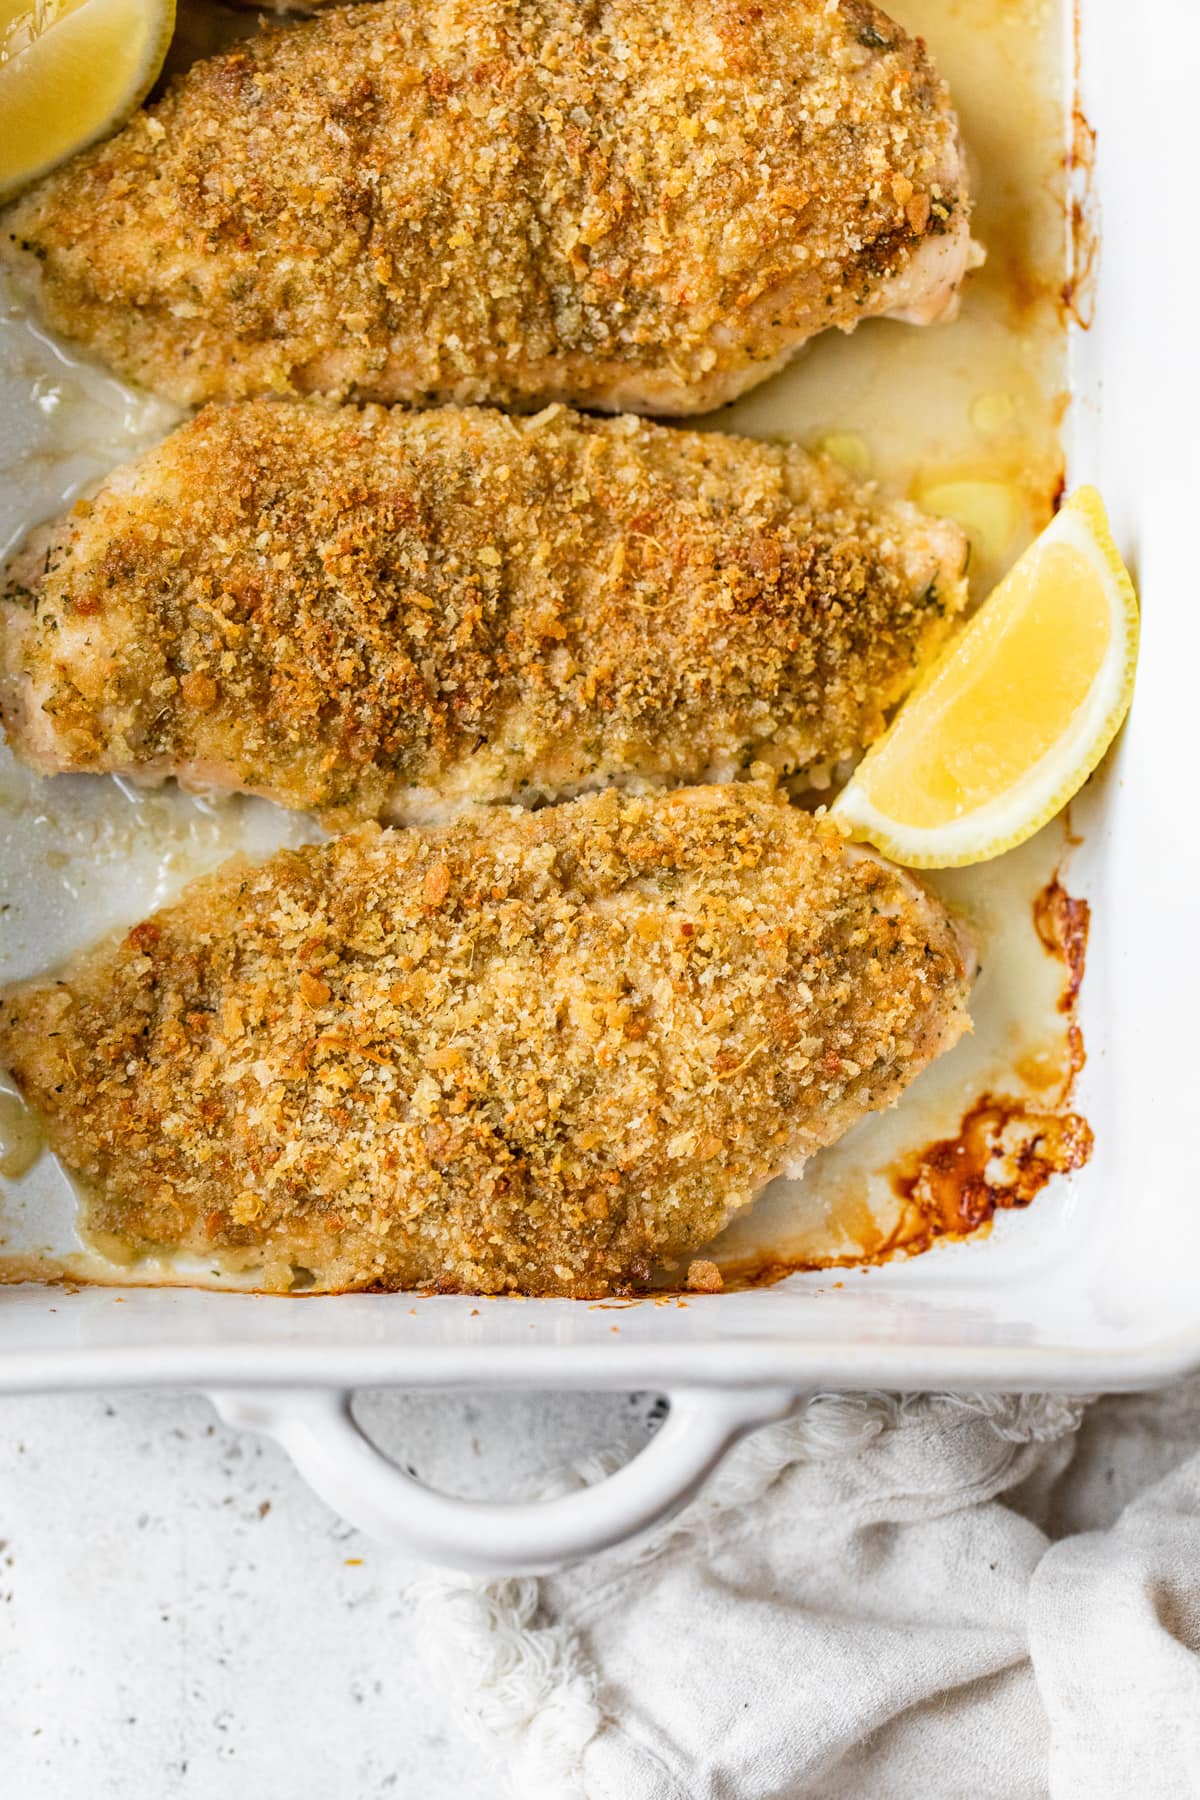 Baked Chicken Breasts with Lemon